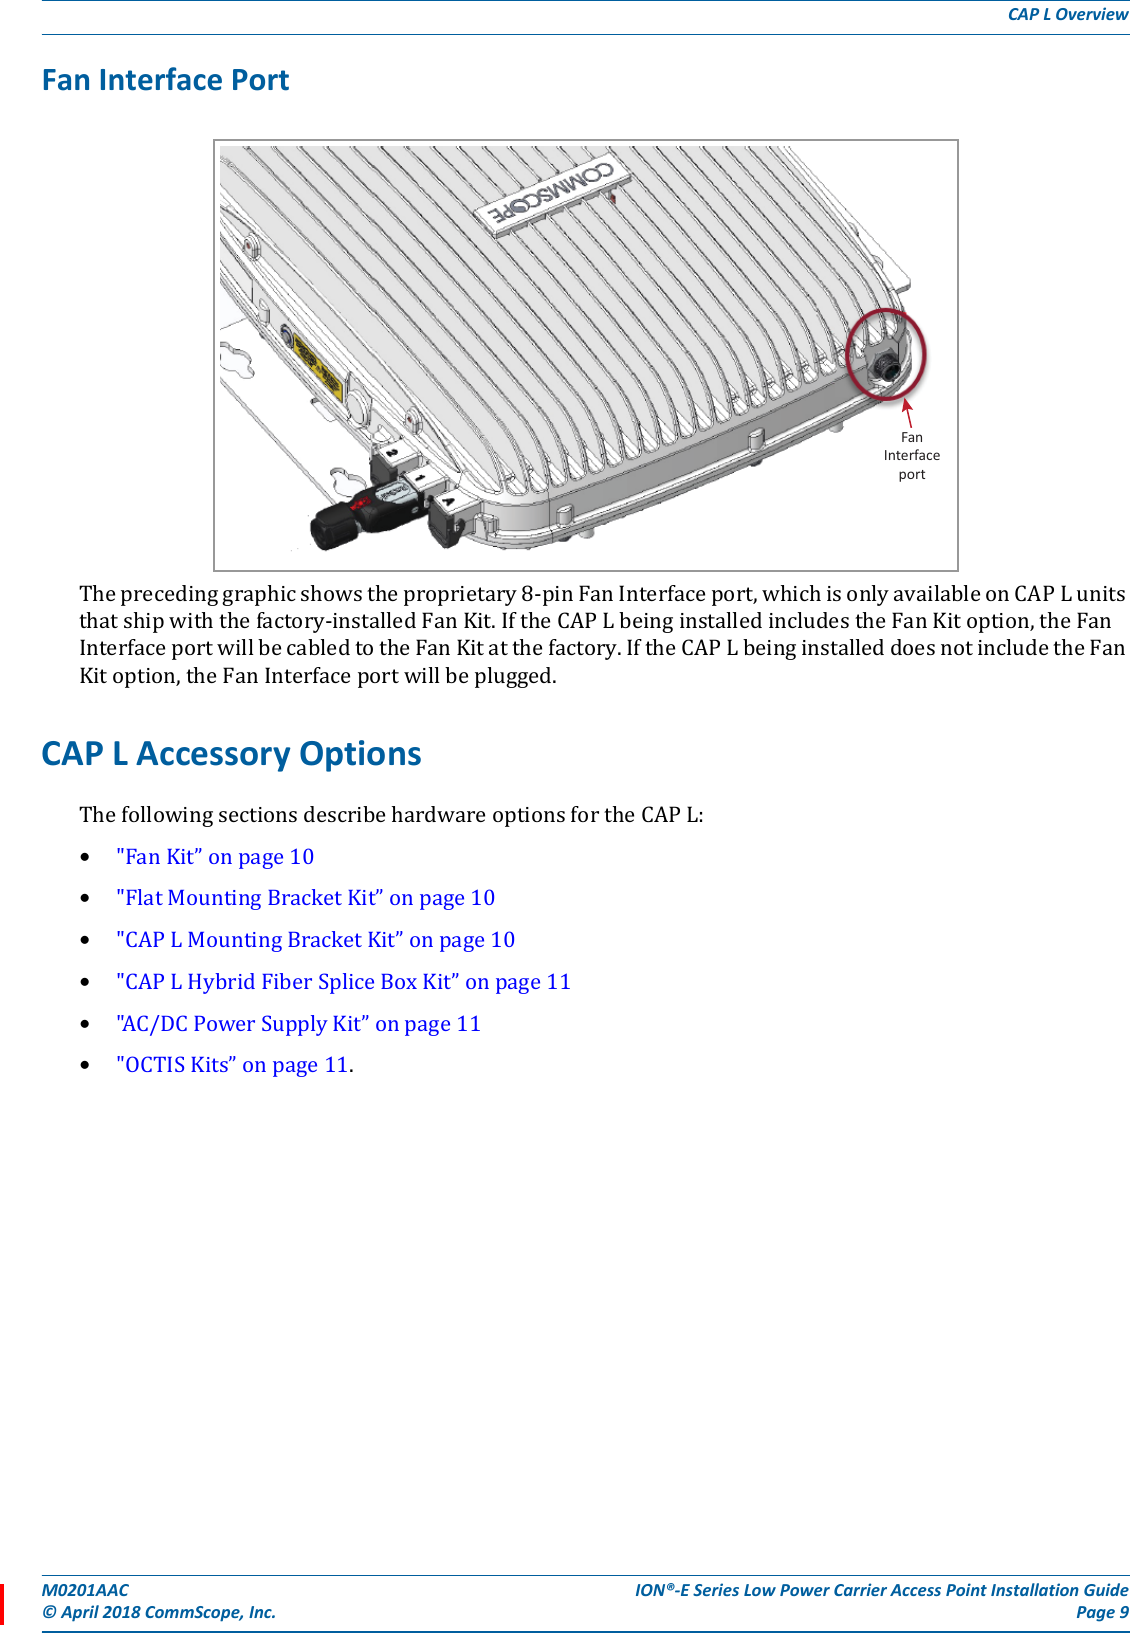 M0201AAC ION®-E Series Low Power Carrier Access Point Installation Guide© April 2018 CommScope, Inc. Page 9CAP L OverviewFan Interface PortTheprecedinggraphicshowstheproprietary8-pinFanInterfaceport,whichisonlyavailableonCAPLunitsthatshipwiththefactory-installedFanKit.IftheCAPLbeinginstalledincludestheFanKitoption,theFanInterfaceportwillbecabledtotheFanKitatthefactory.IftheCAPLbeinginstalleddoesnotincludetheFanKitoption,theFanInterfaceportwillbeplugged.CAP L Accessory OptionsThefollowingsectionsdescribehardwareoptionsfortheCAPL:•&quot;FanKit”onpage10•&quot;FlatMountingBracketKit”onpage10•&quot;CAPLMountingBracketKit”onpage10•&quot;CAPLHybridFiberSpliceBoxKit”onpage11•&quot;AC/DCPowerSupplyKit”onpage11•&quot;OCTISKits”onpage11.FanInterfaceport